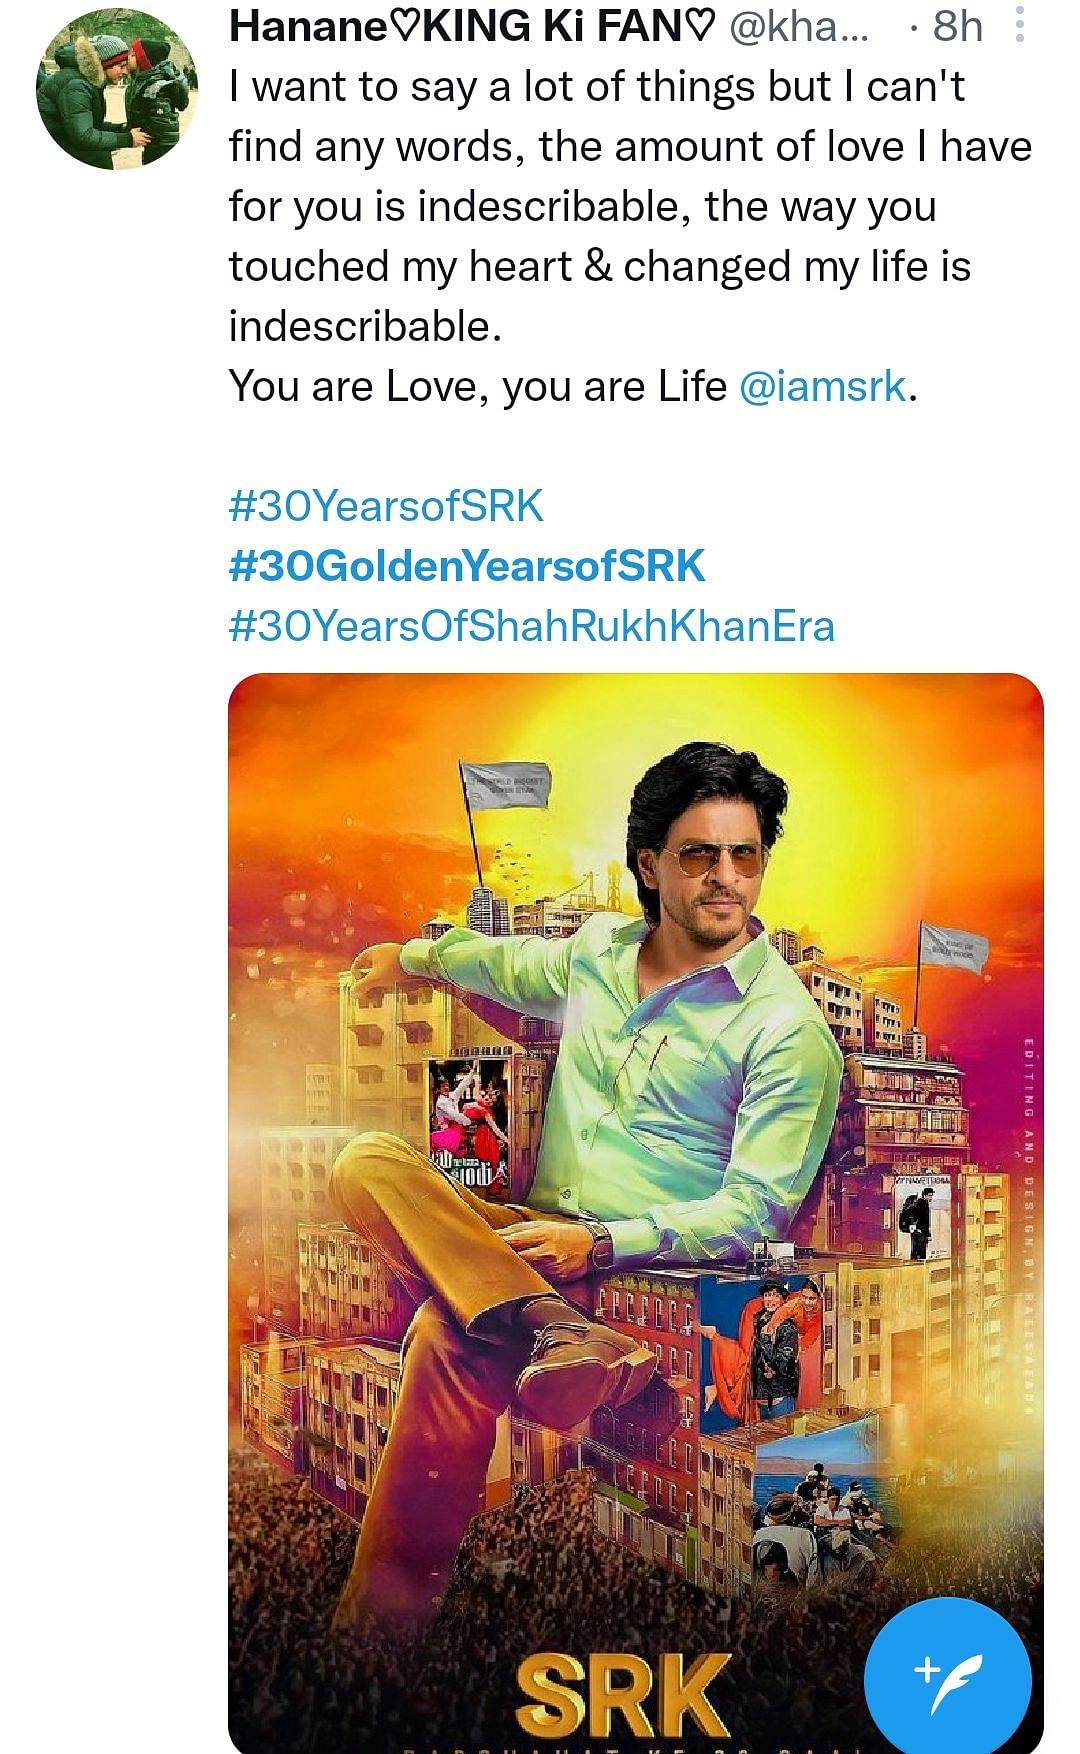 From 'Deewana' to 'Dunki' Shah Rukh Khan remains the undisputed 'King of Bollywood.' 